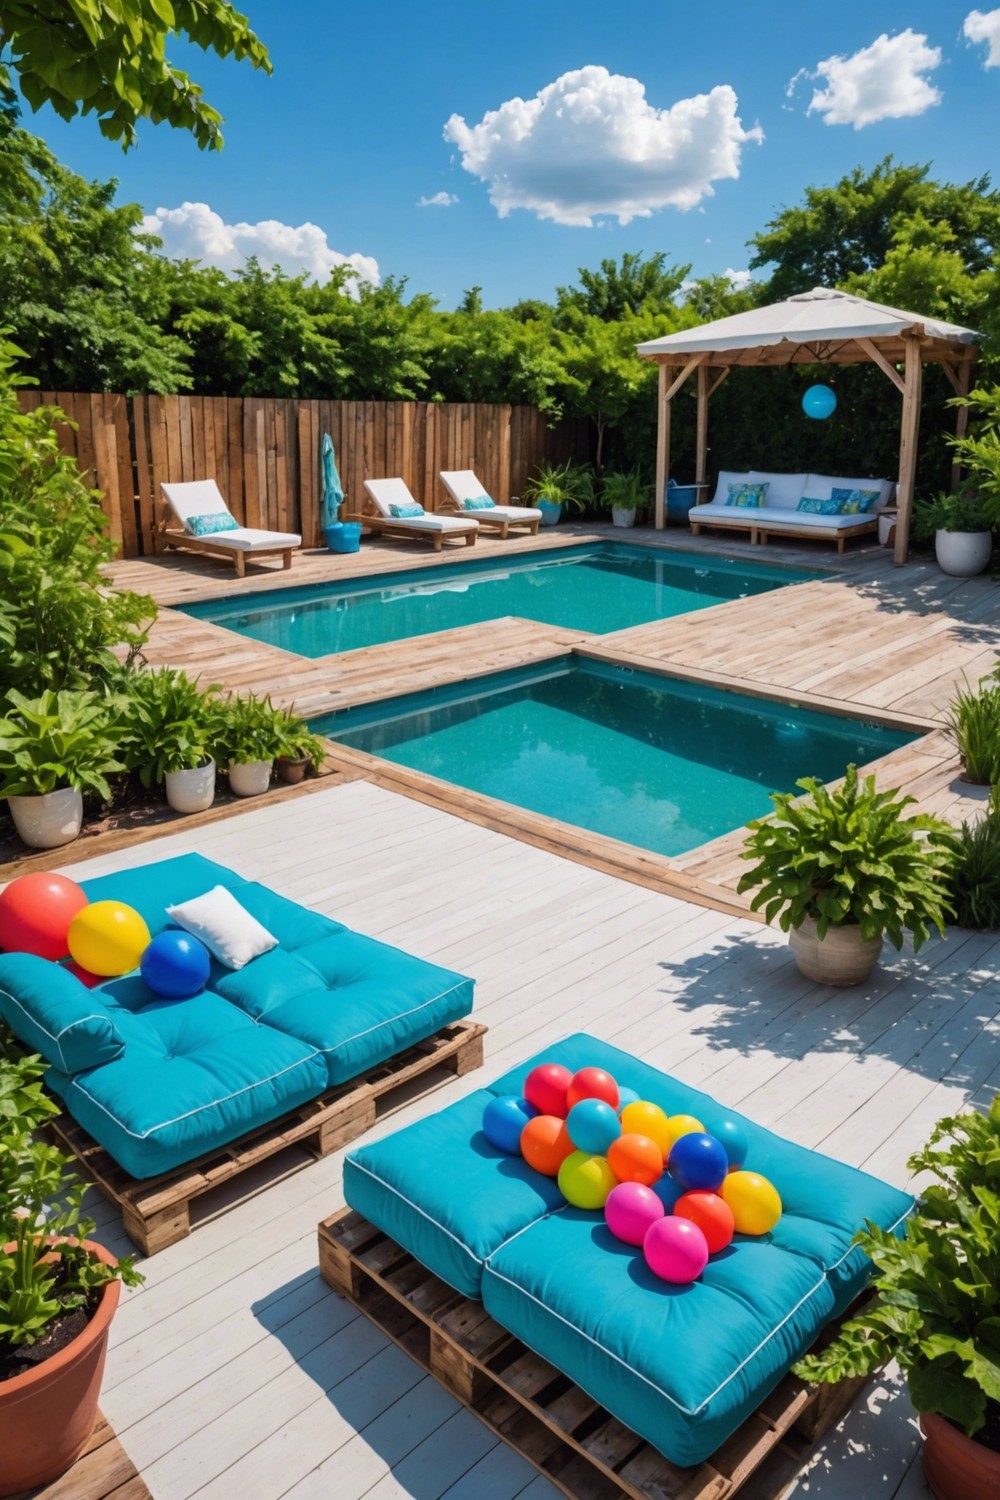 Pallet Pool Deck with Built-in Bench and Table